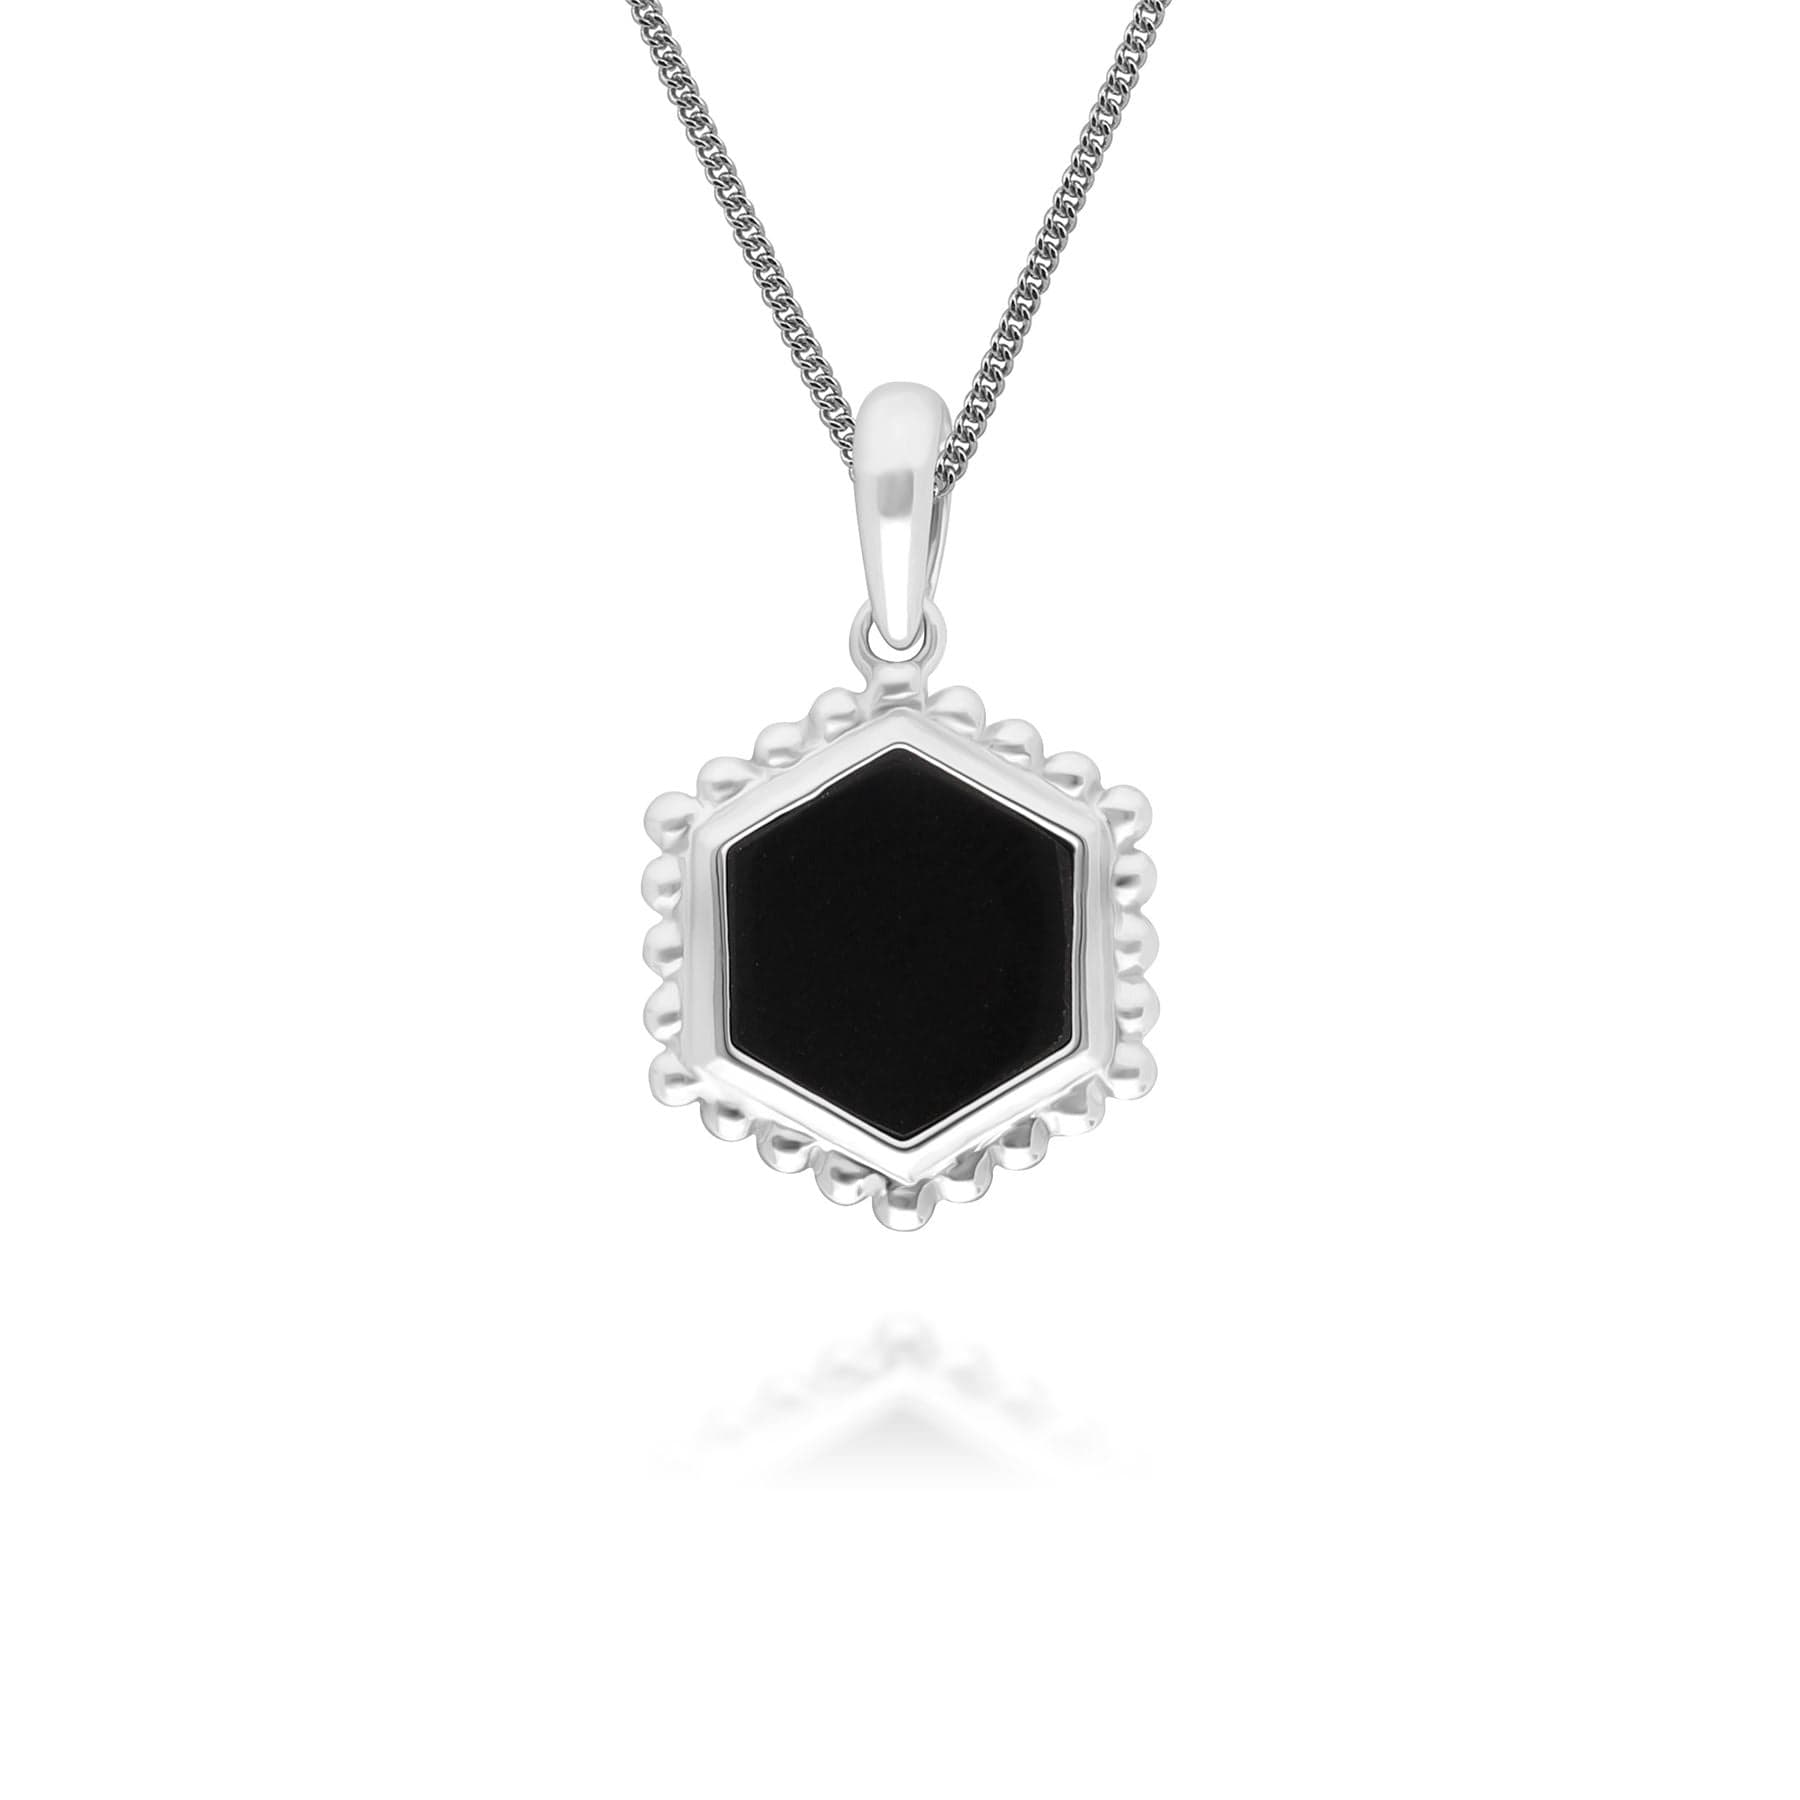 Photos - Pendant / Choker Necklace Black Onyx Slice Pendant Necklace in 925 Sterling Silver